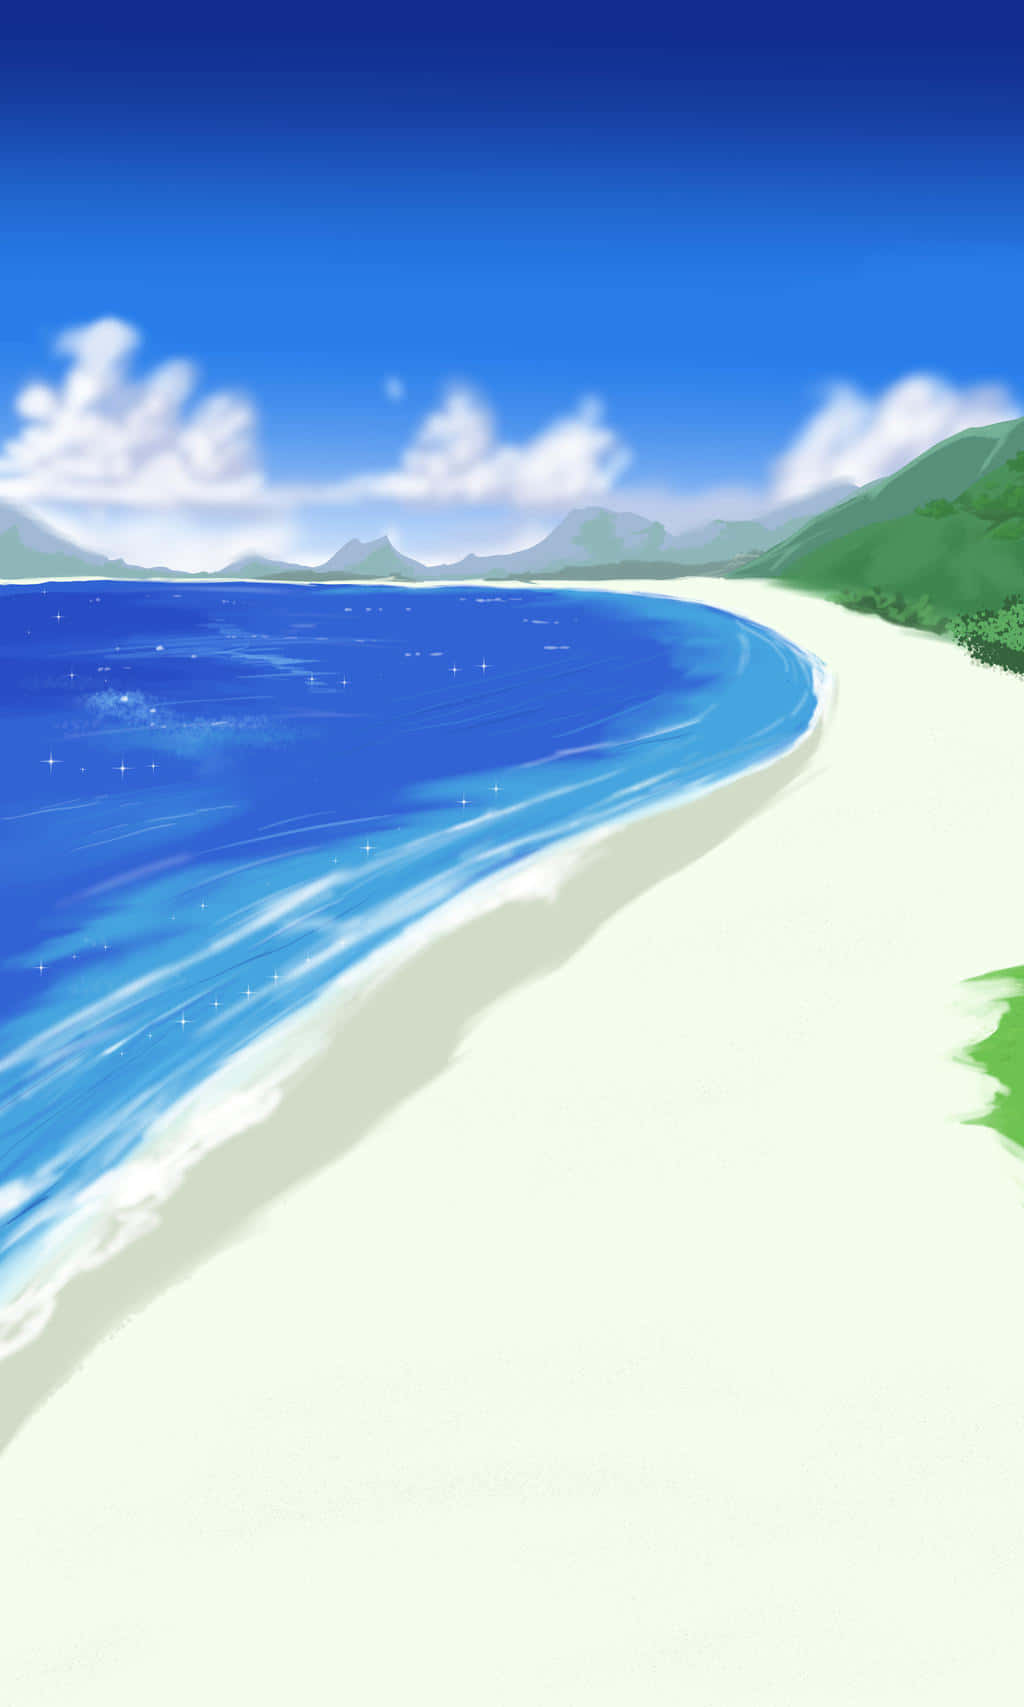 Relaxing on a Vibrant Anime Beach